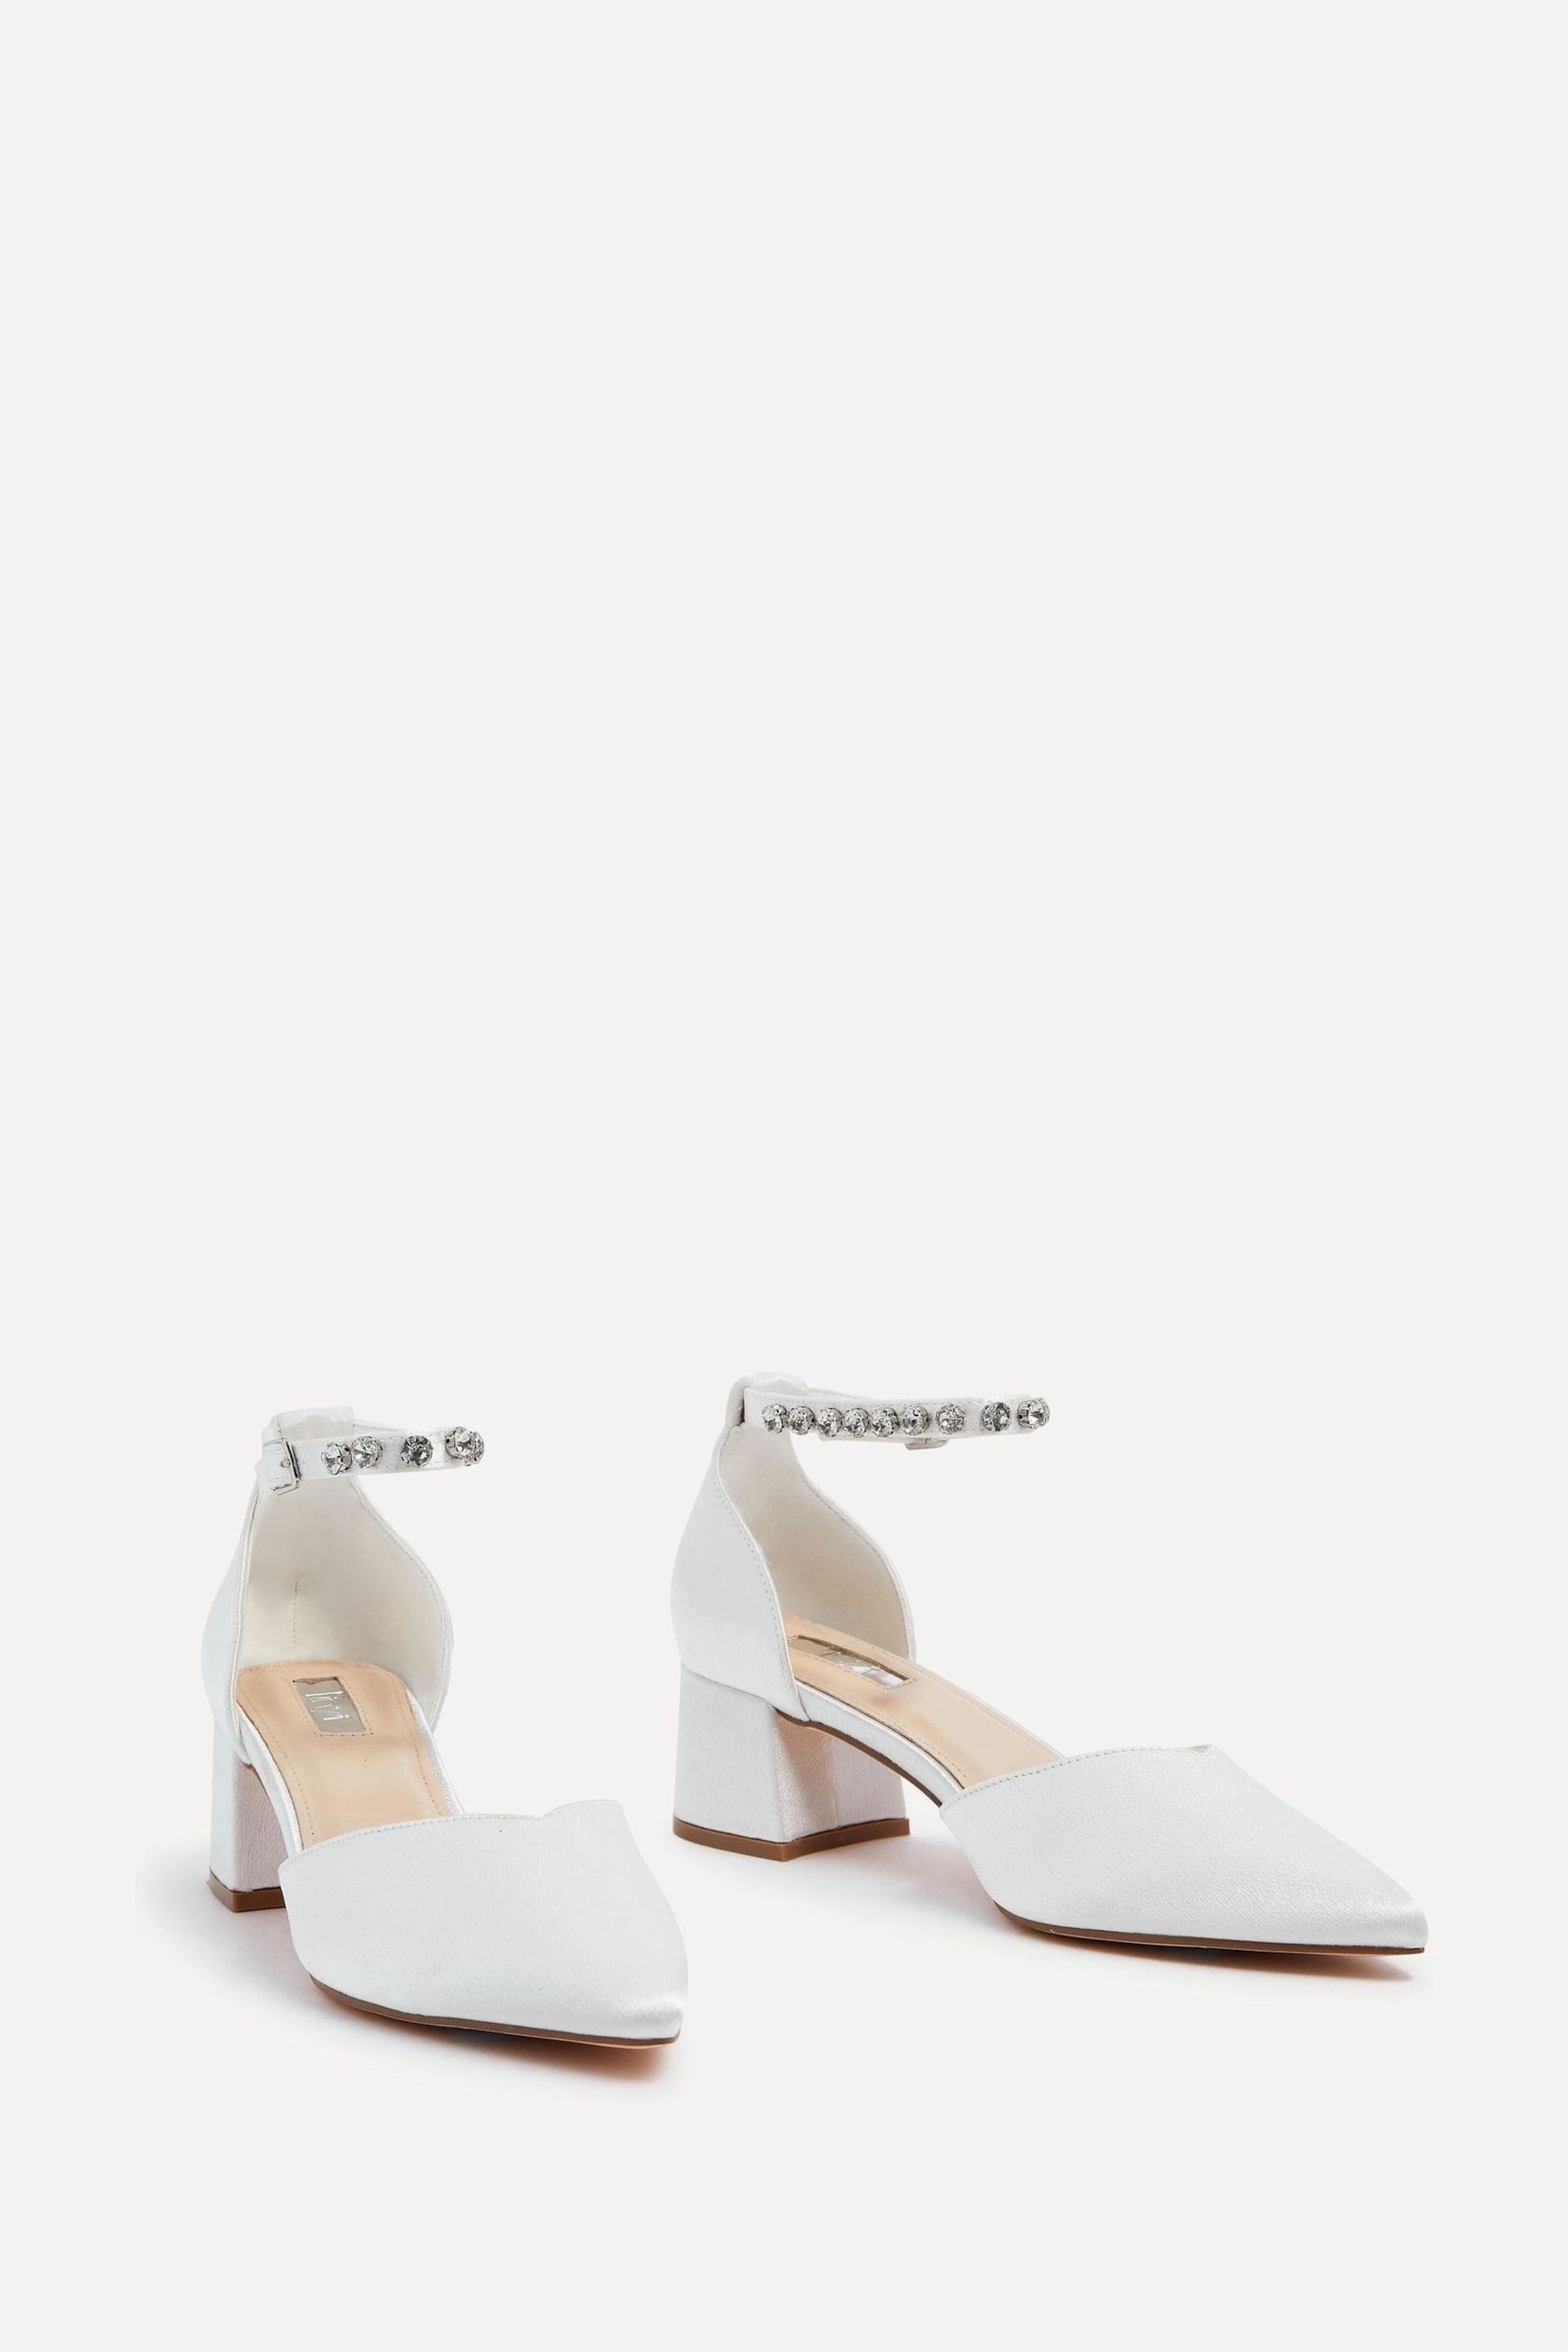 Linzi Natural Jordanna Ivory Satin Low Block Court Heels With Embellished Ankle Strap - Image 3 of 5